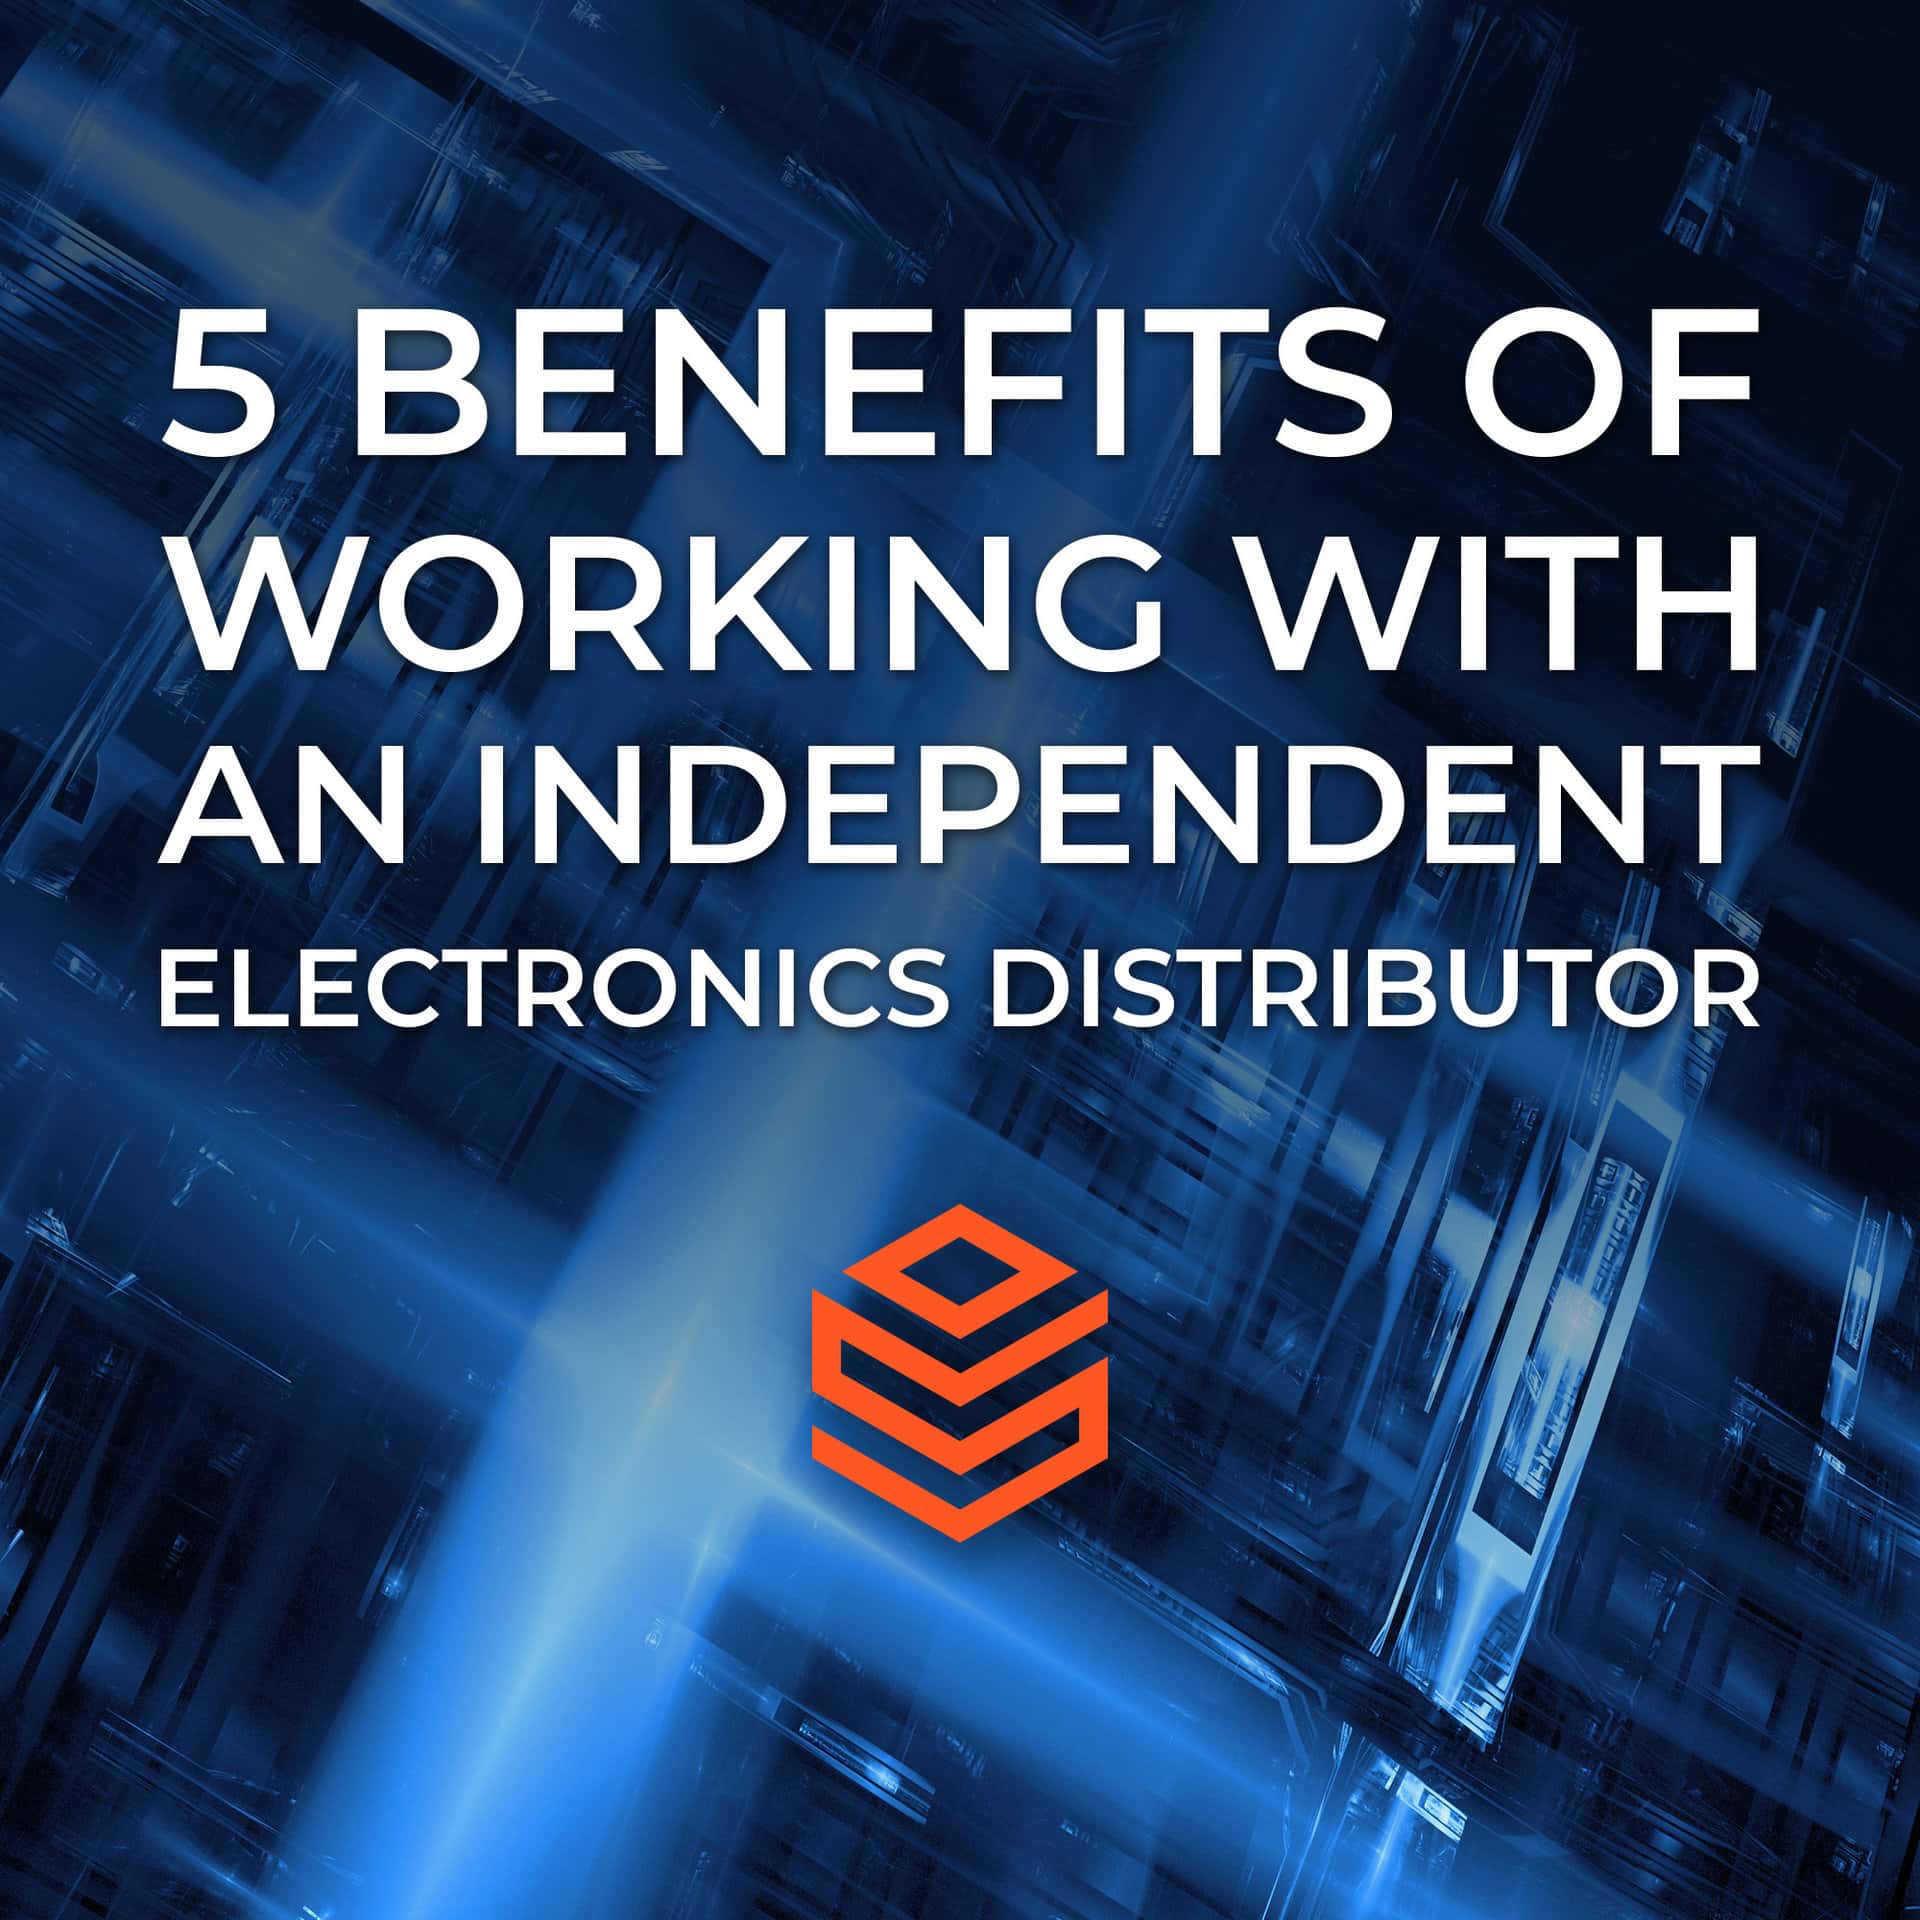 5 Benefits of Working with an Independent Electronics Distributor